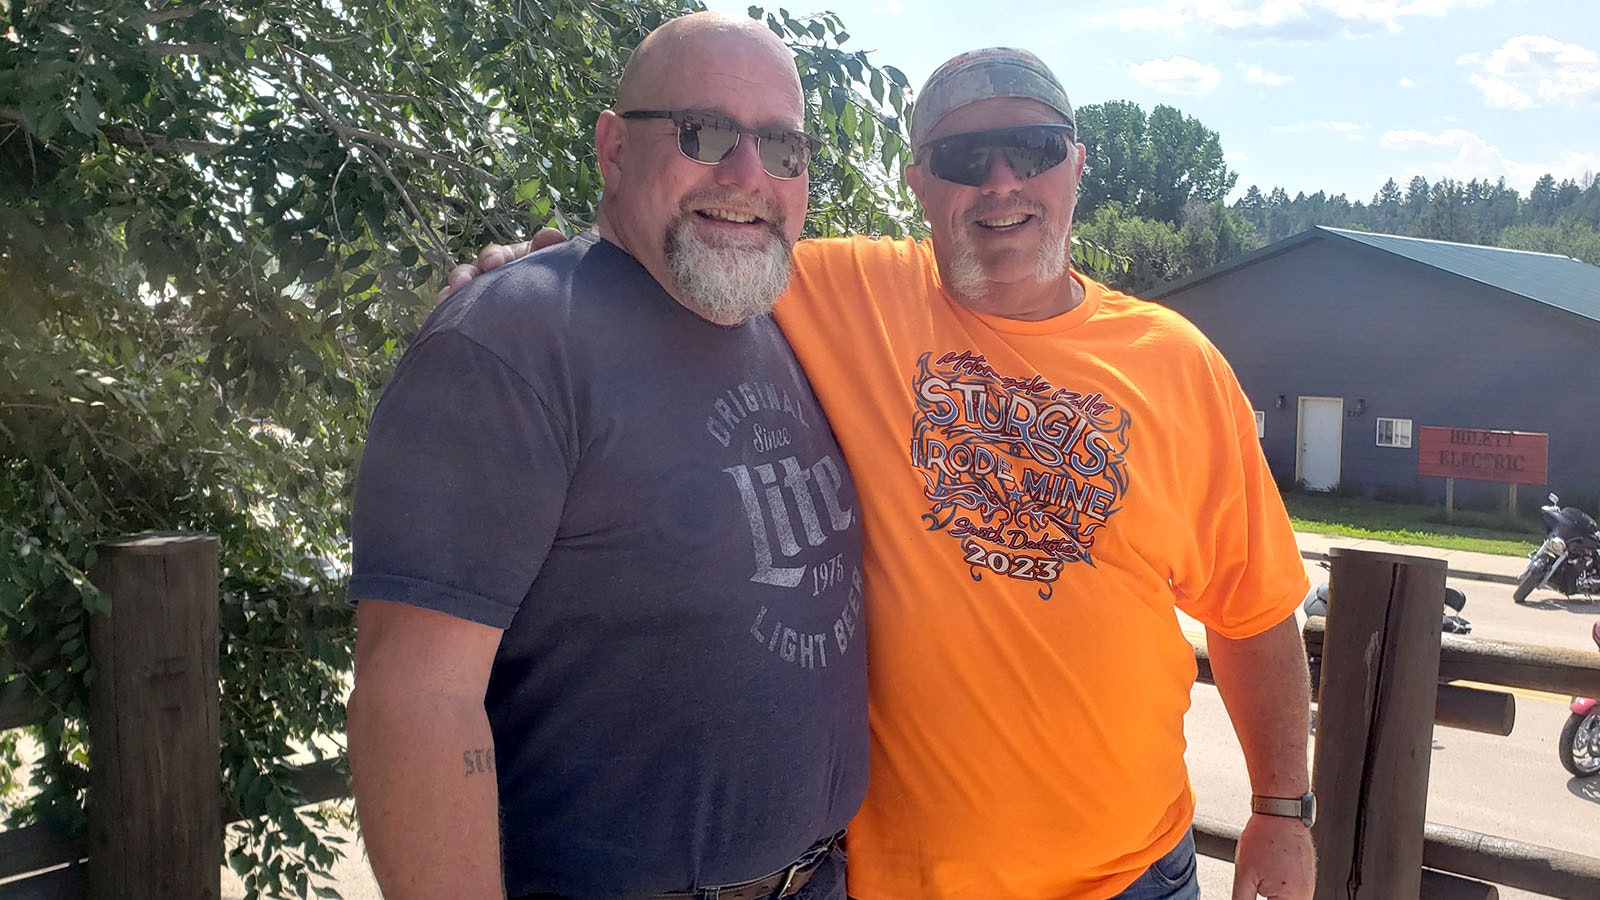 Combat veteran Vernon Shaffer, right, wanted to come to the Sturgis rally this year to check off a bucket list item. He's traveling with his cousin, Steve Johnson, at left,